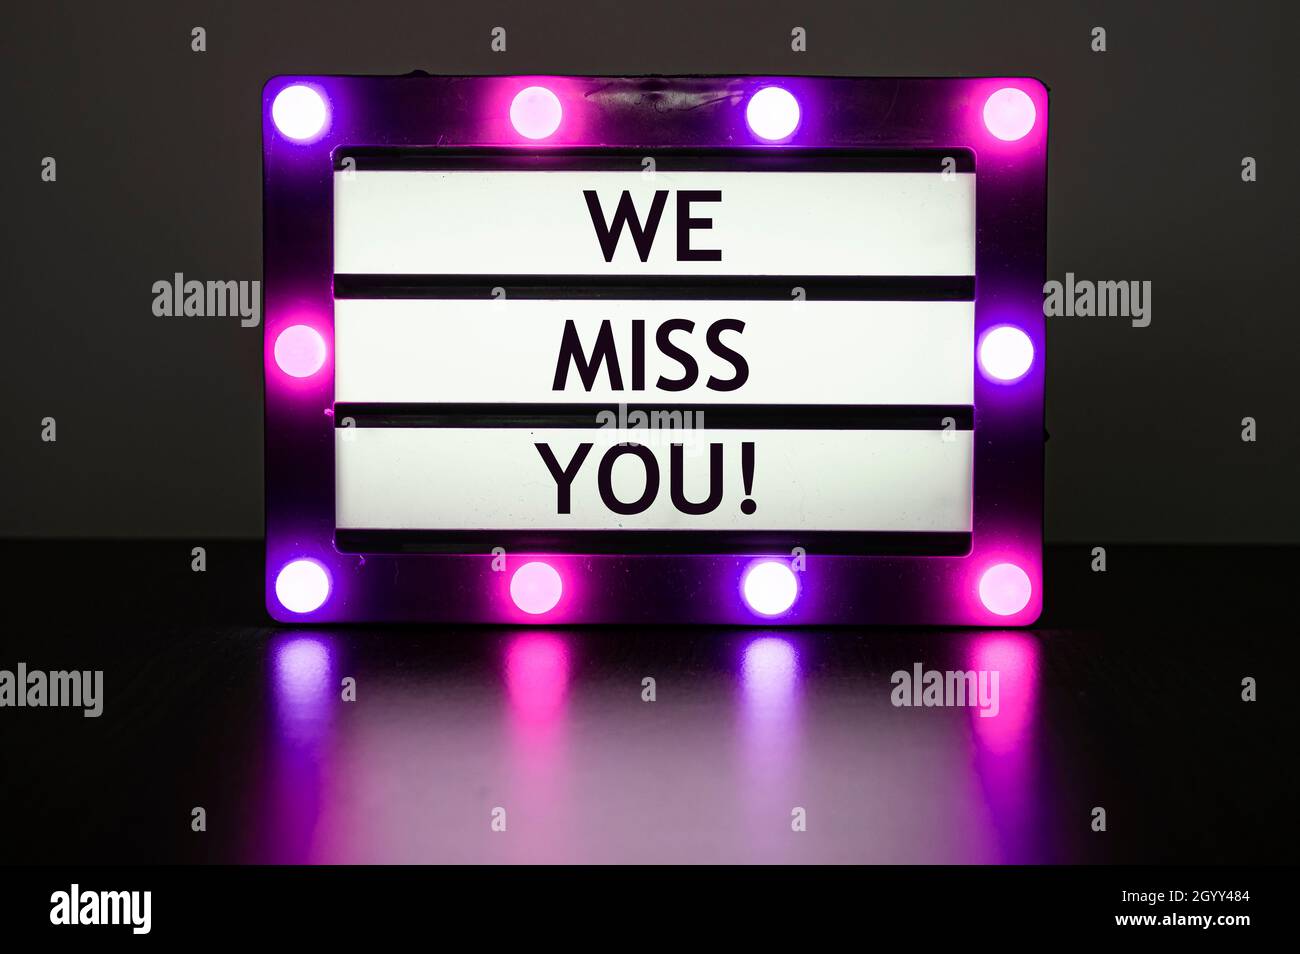 Lightbox with pink lights in dark room with words - we miss you! Stock Photo